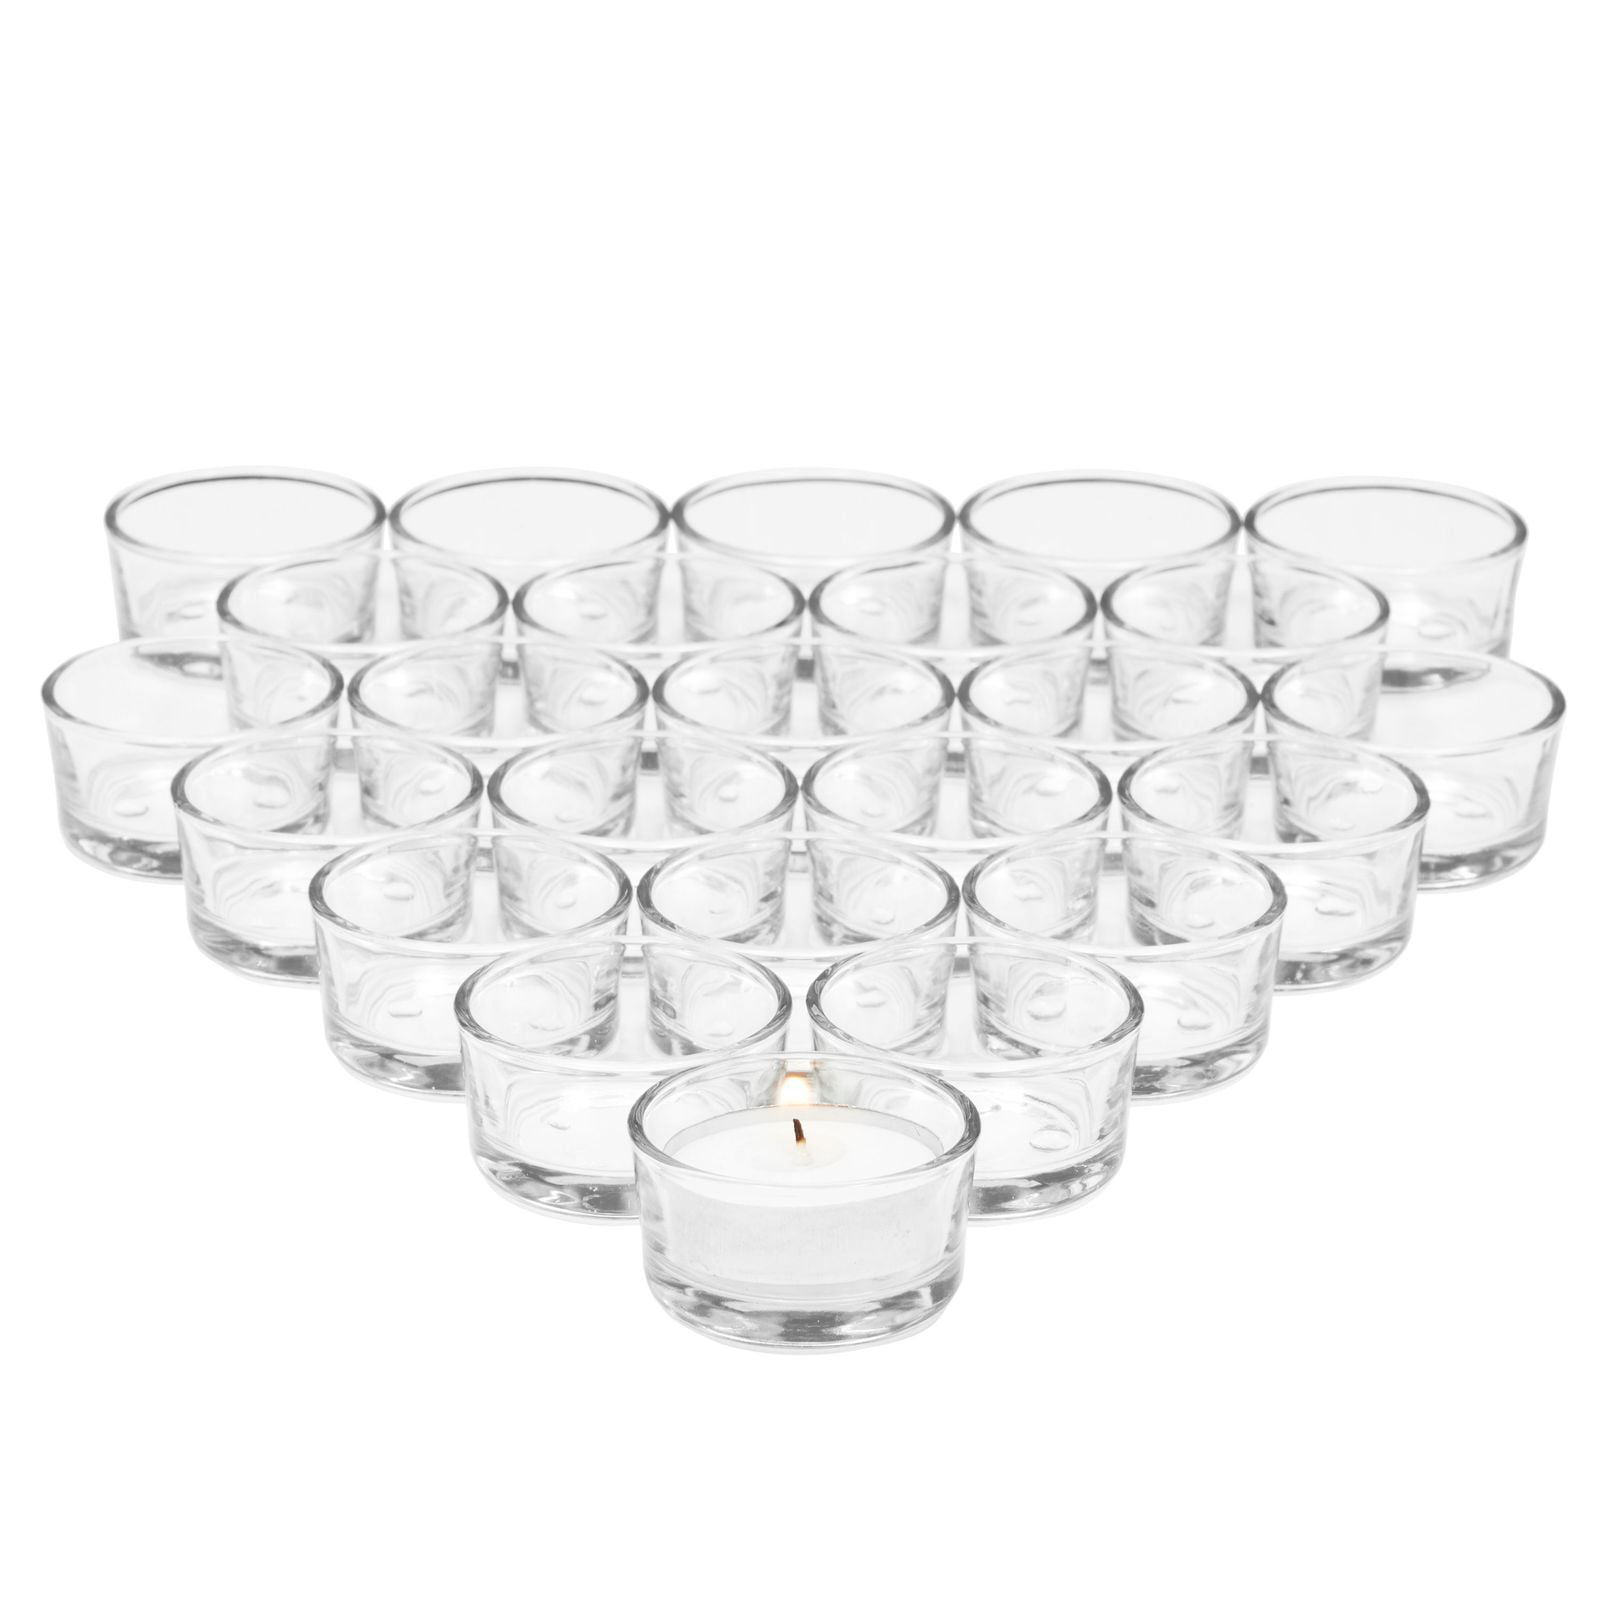 clear glass tube tealight holder candle holder dinner wedding centerpieces 